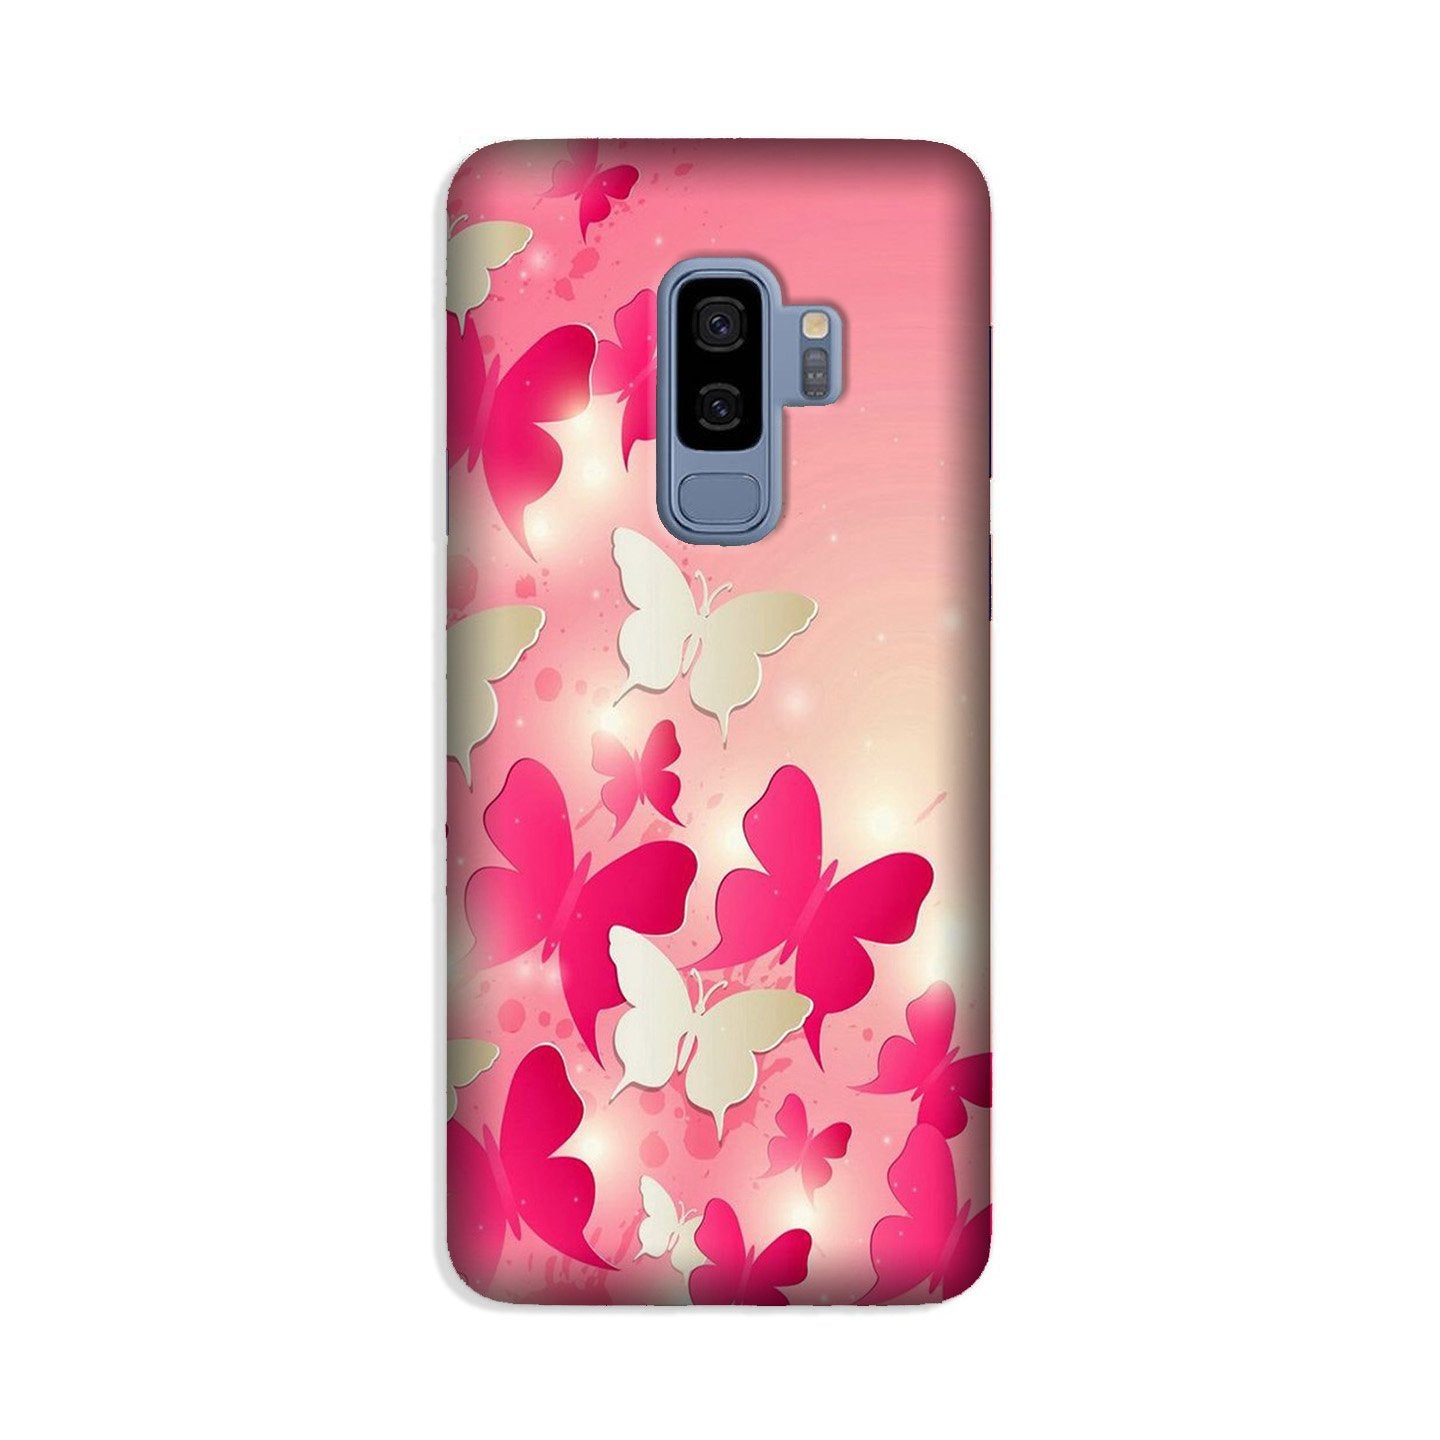 White Pick Butterflies Case for Galaxy S9 Plus